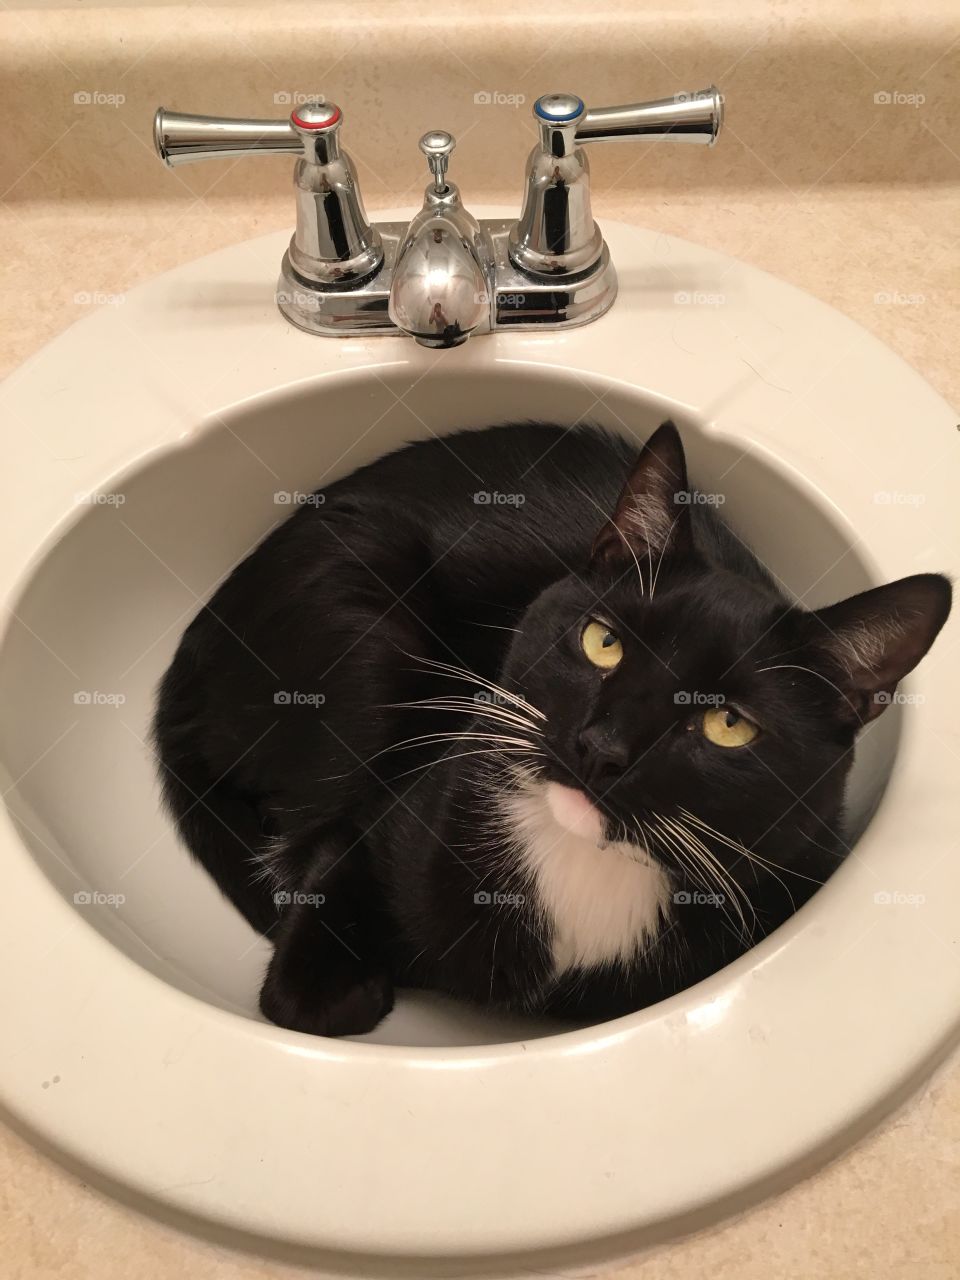 Kitty in the sink!